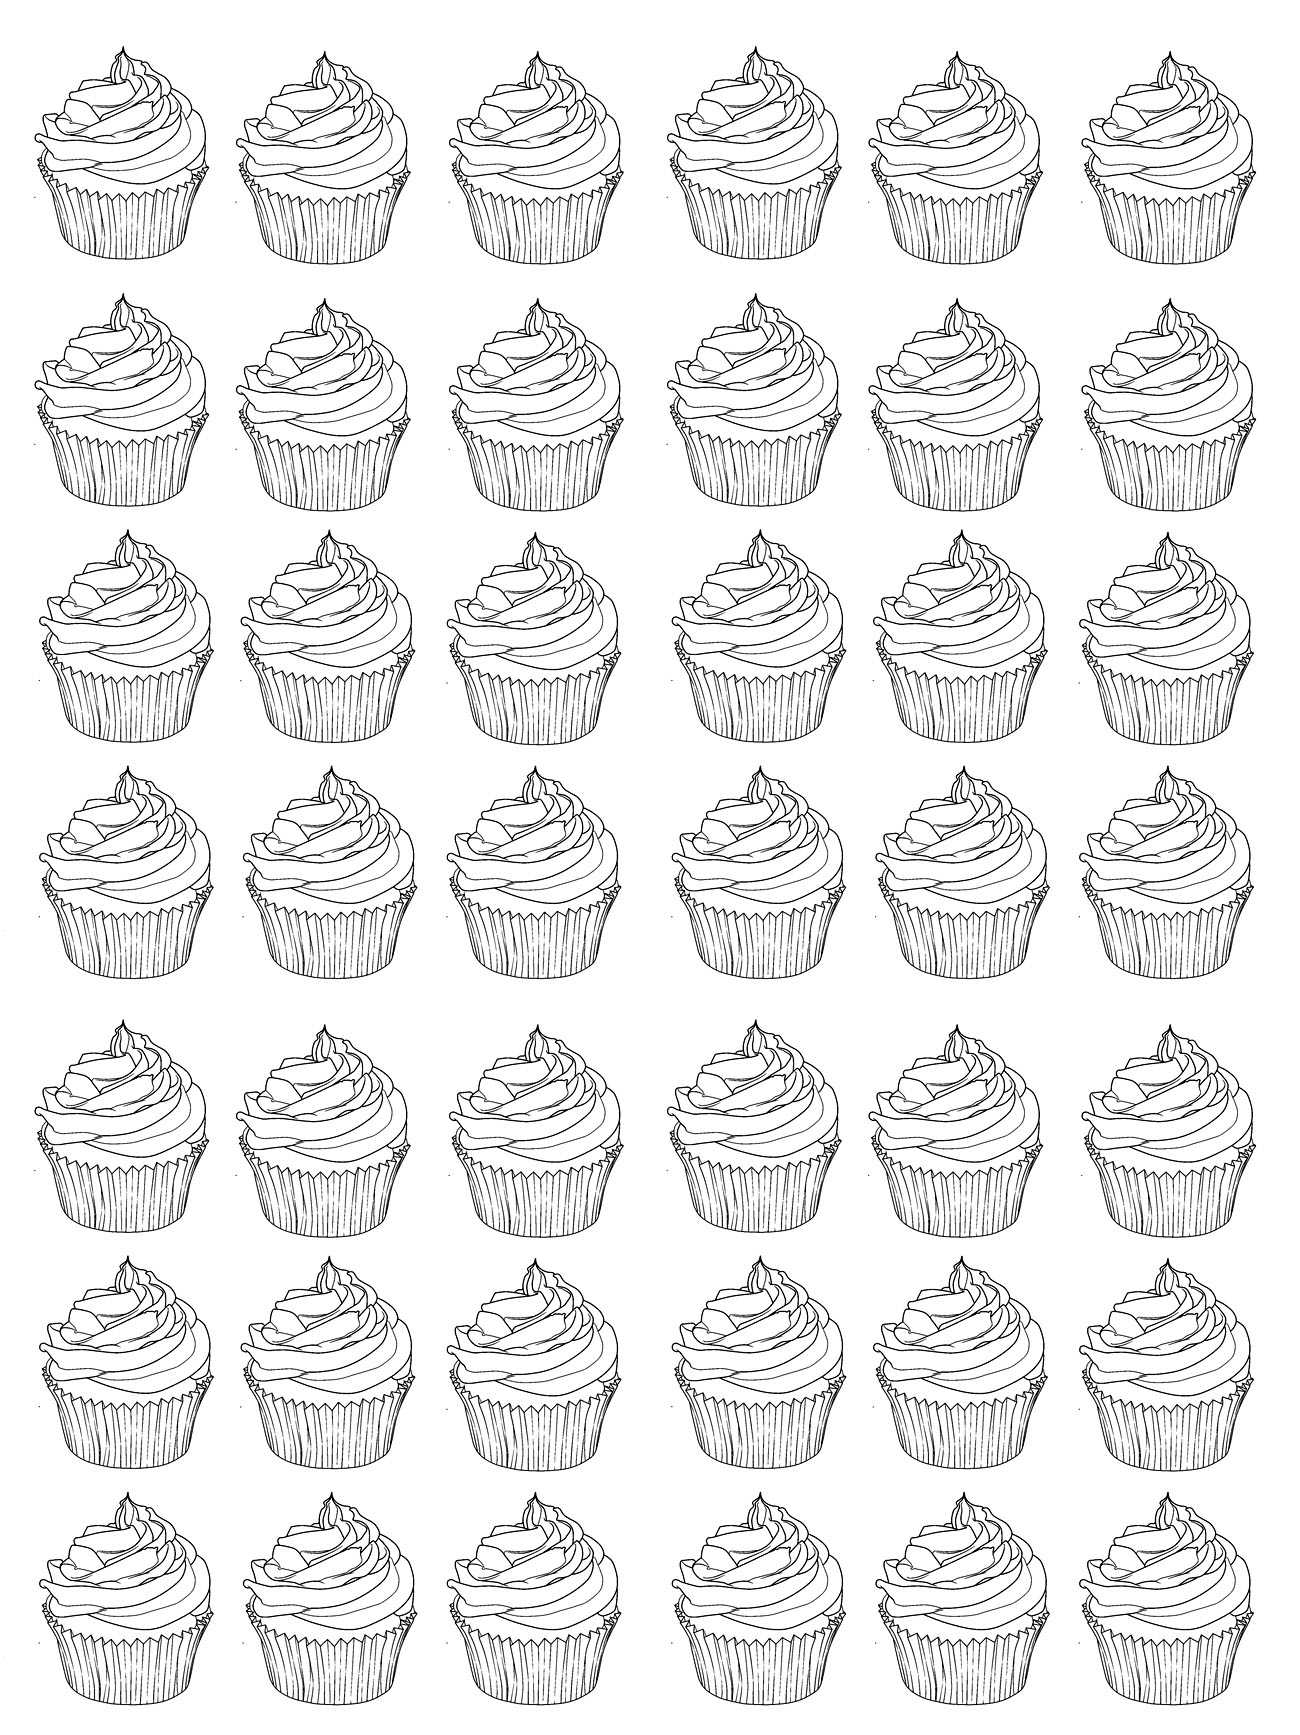 If Andy Warhol had painted cupcakes